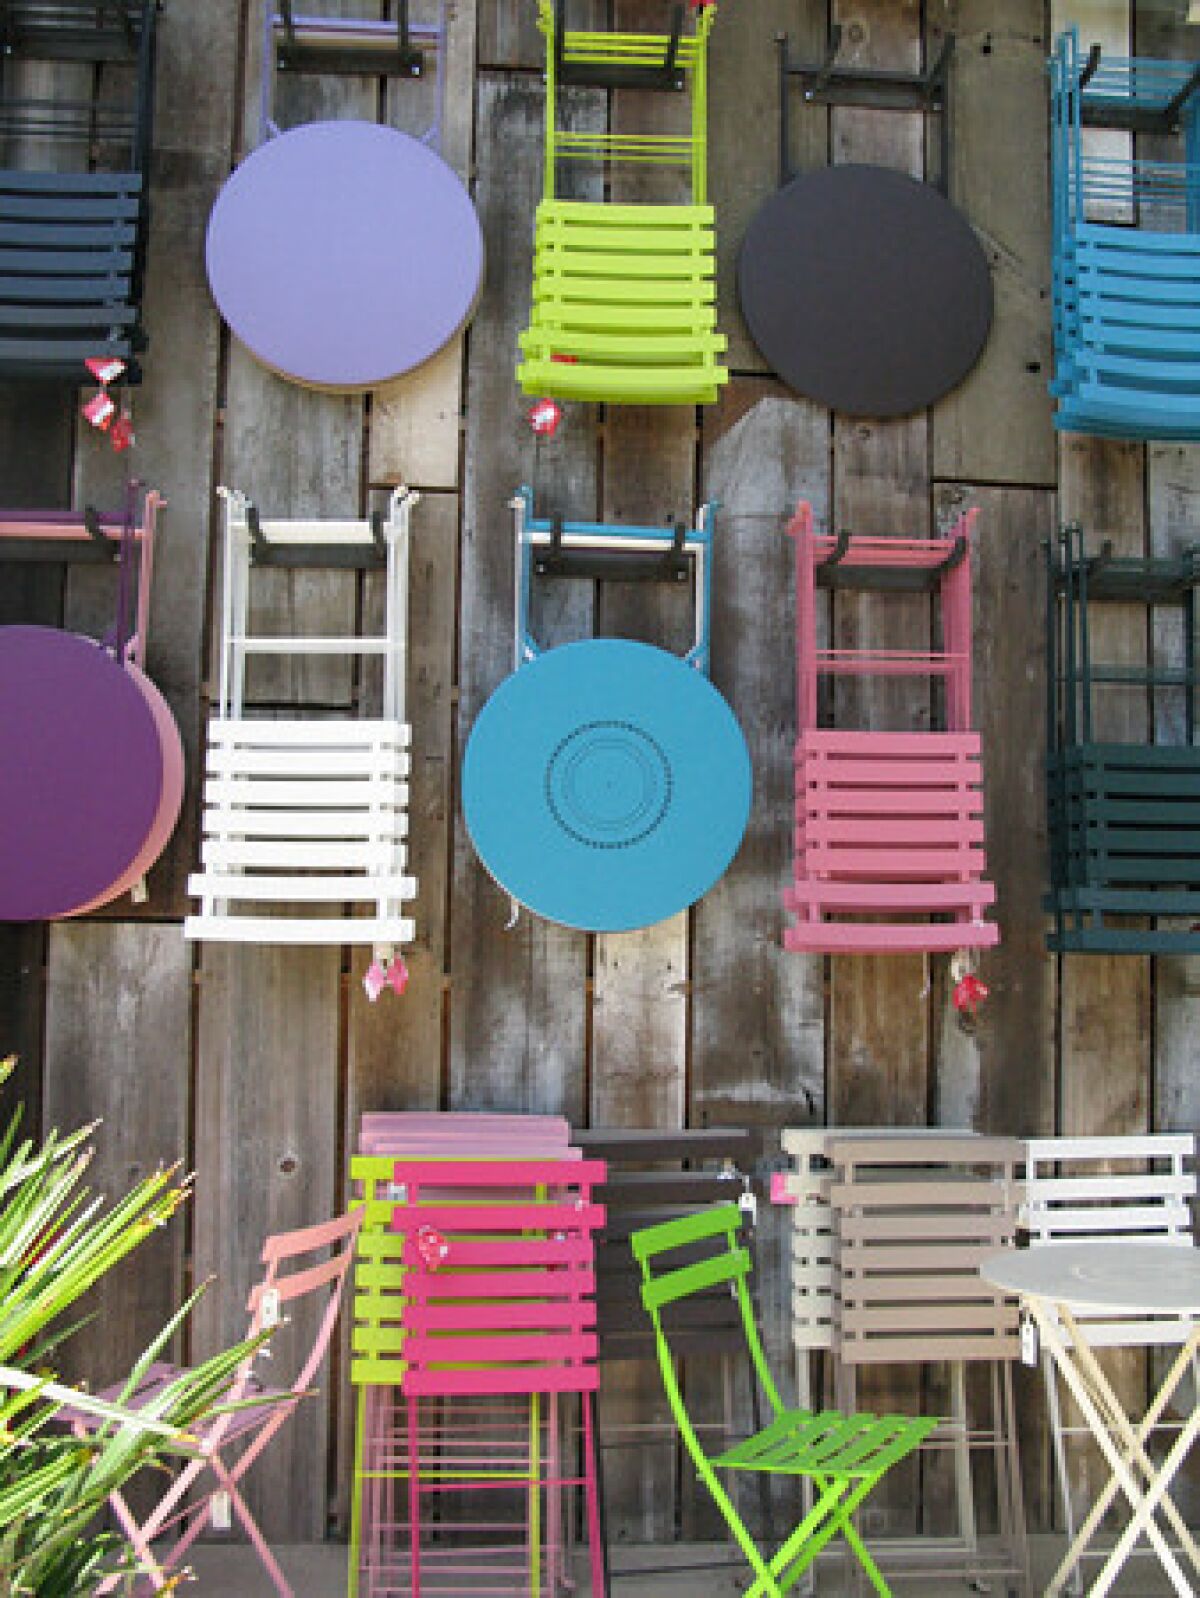 Outdoor furniture and accessories by Fermob.